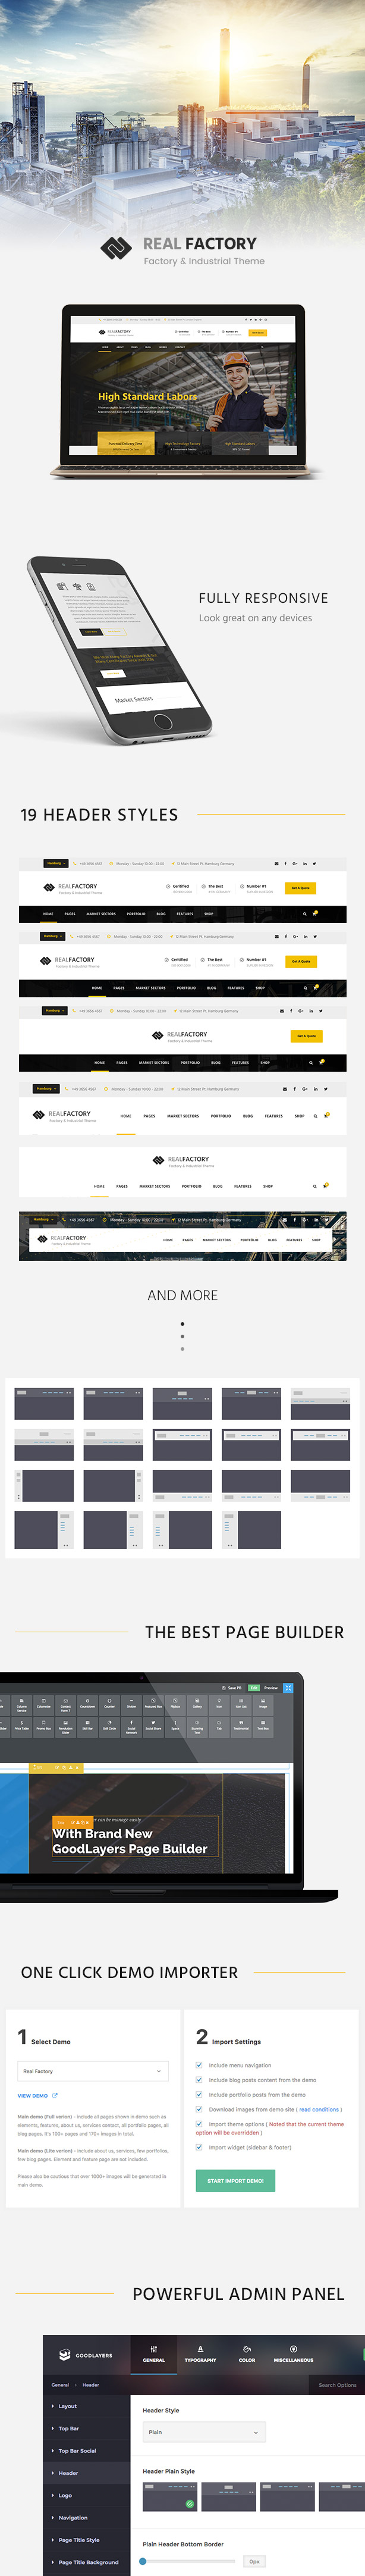 WordPress theme Real Factory - Factory / Industrial / Construction Responsive WP Theme (Business)